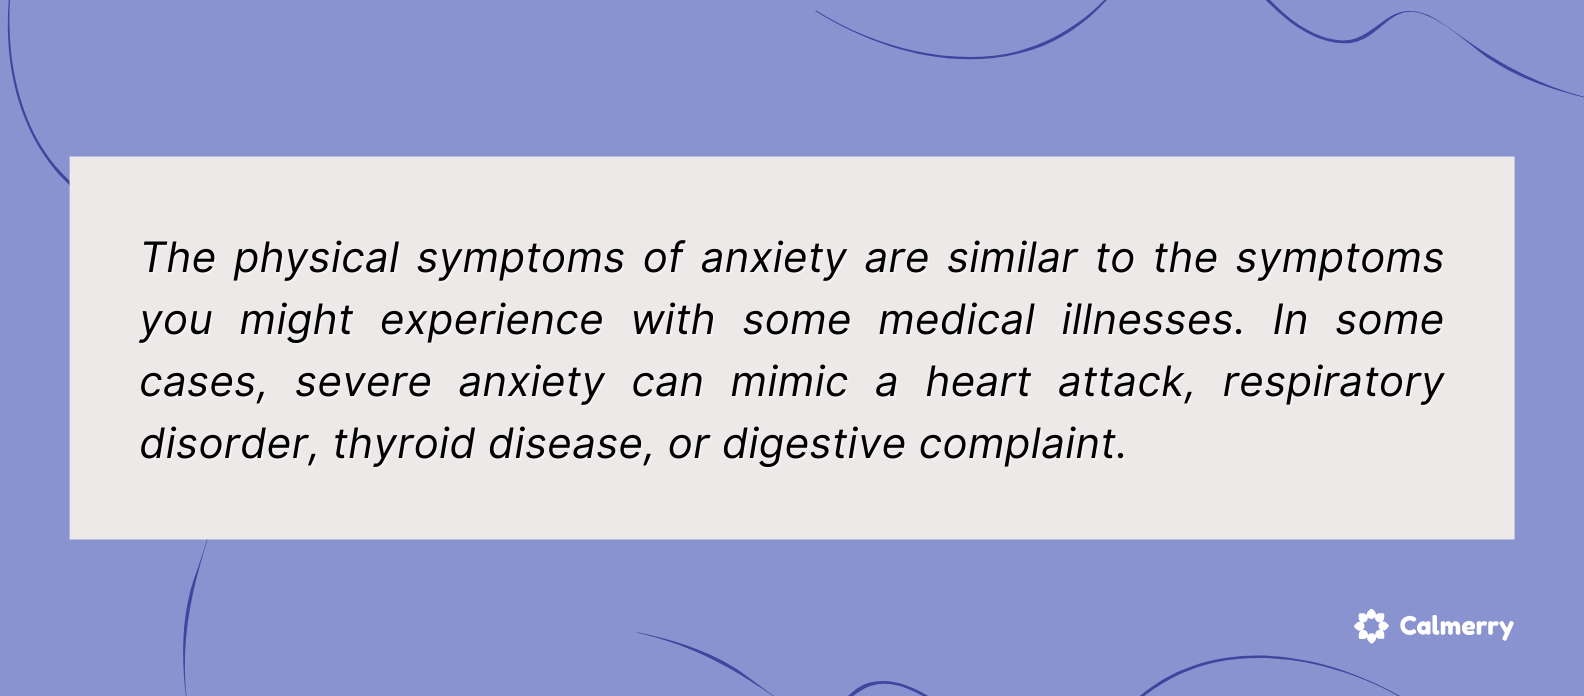 The physical symptoms of anxiety are similar to the symptoms you might experience with some medical illnesses.